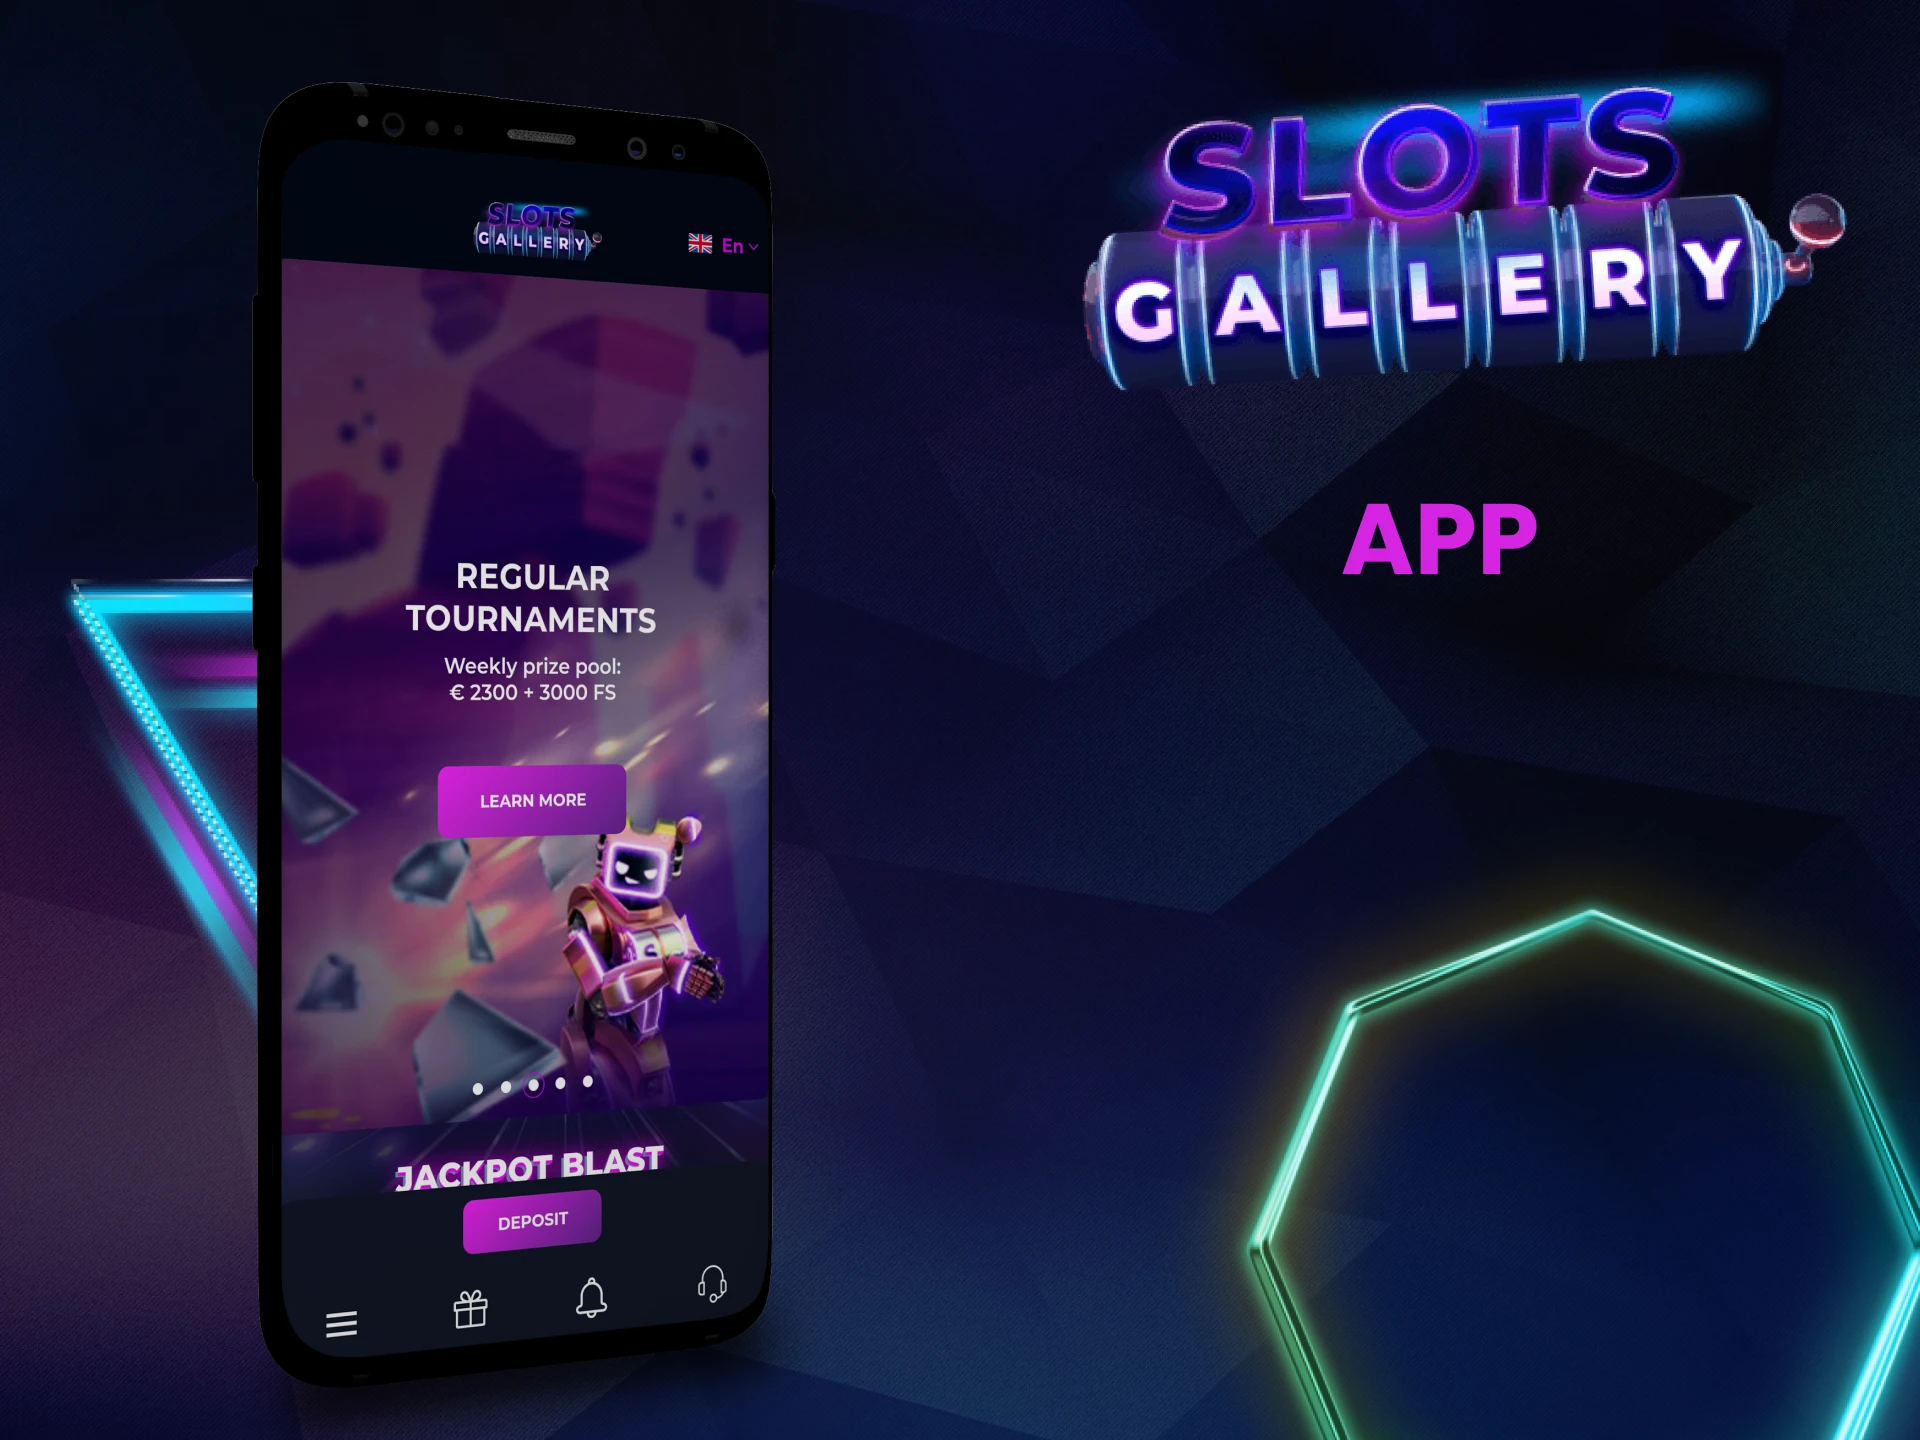 You can use the SlotsGallery mobile app.